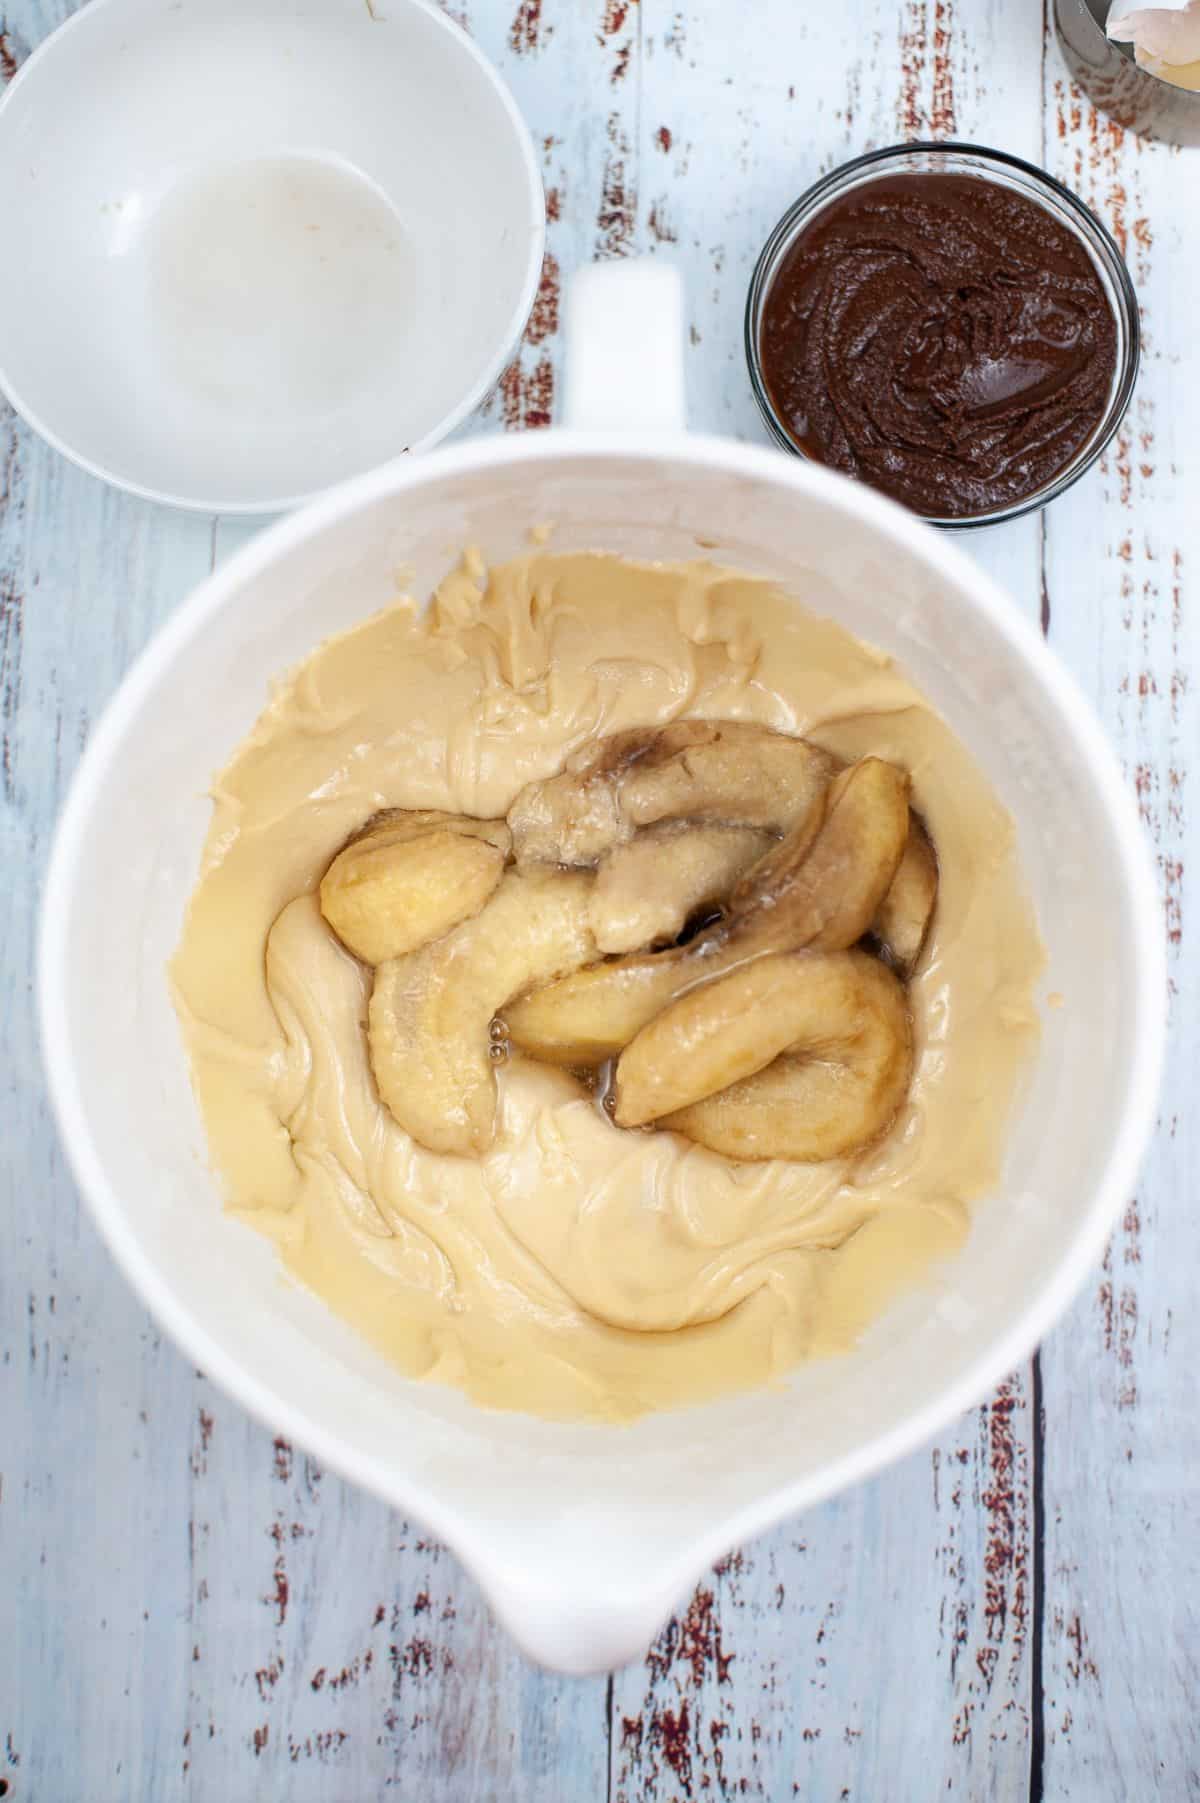 mashed bananas in a bowl of batter next to nutella in a glass bowl and an empty white bowl